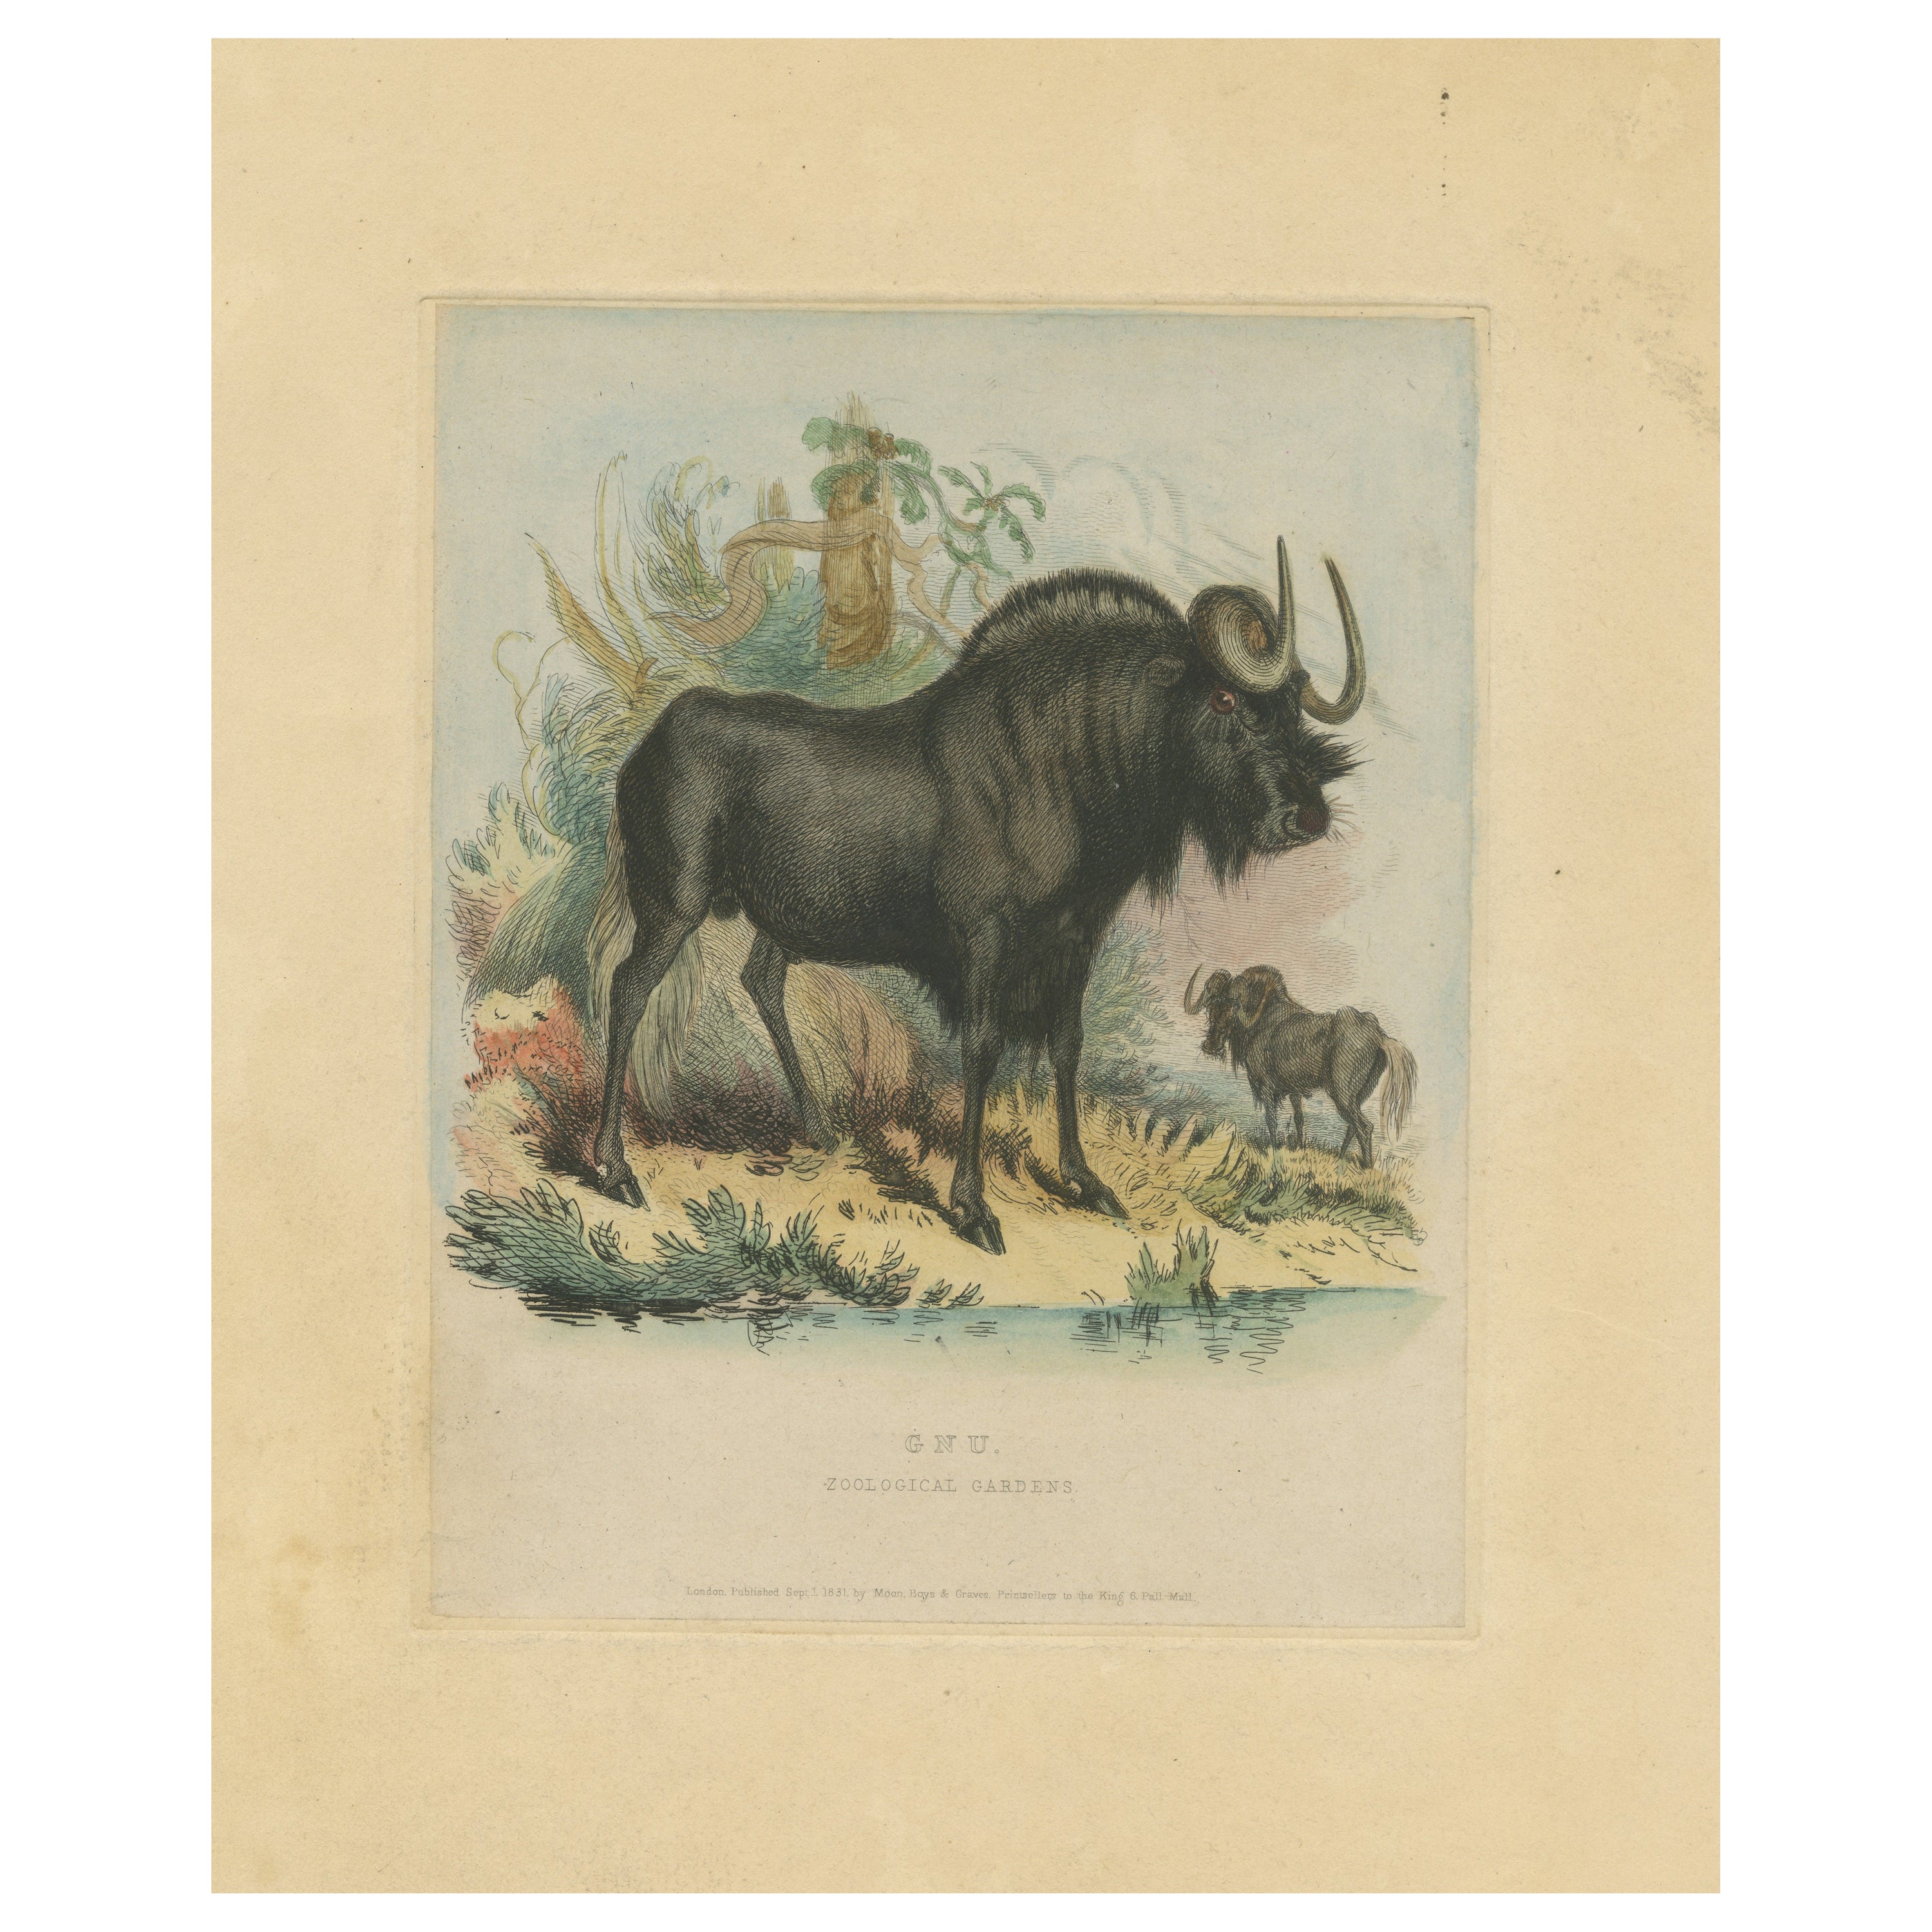 Antique Animal Print of a Gnu or Wildebeest For Sale